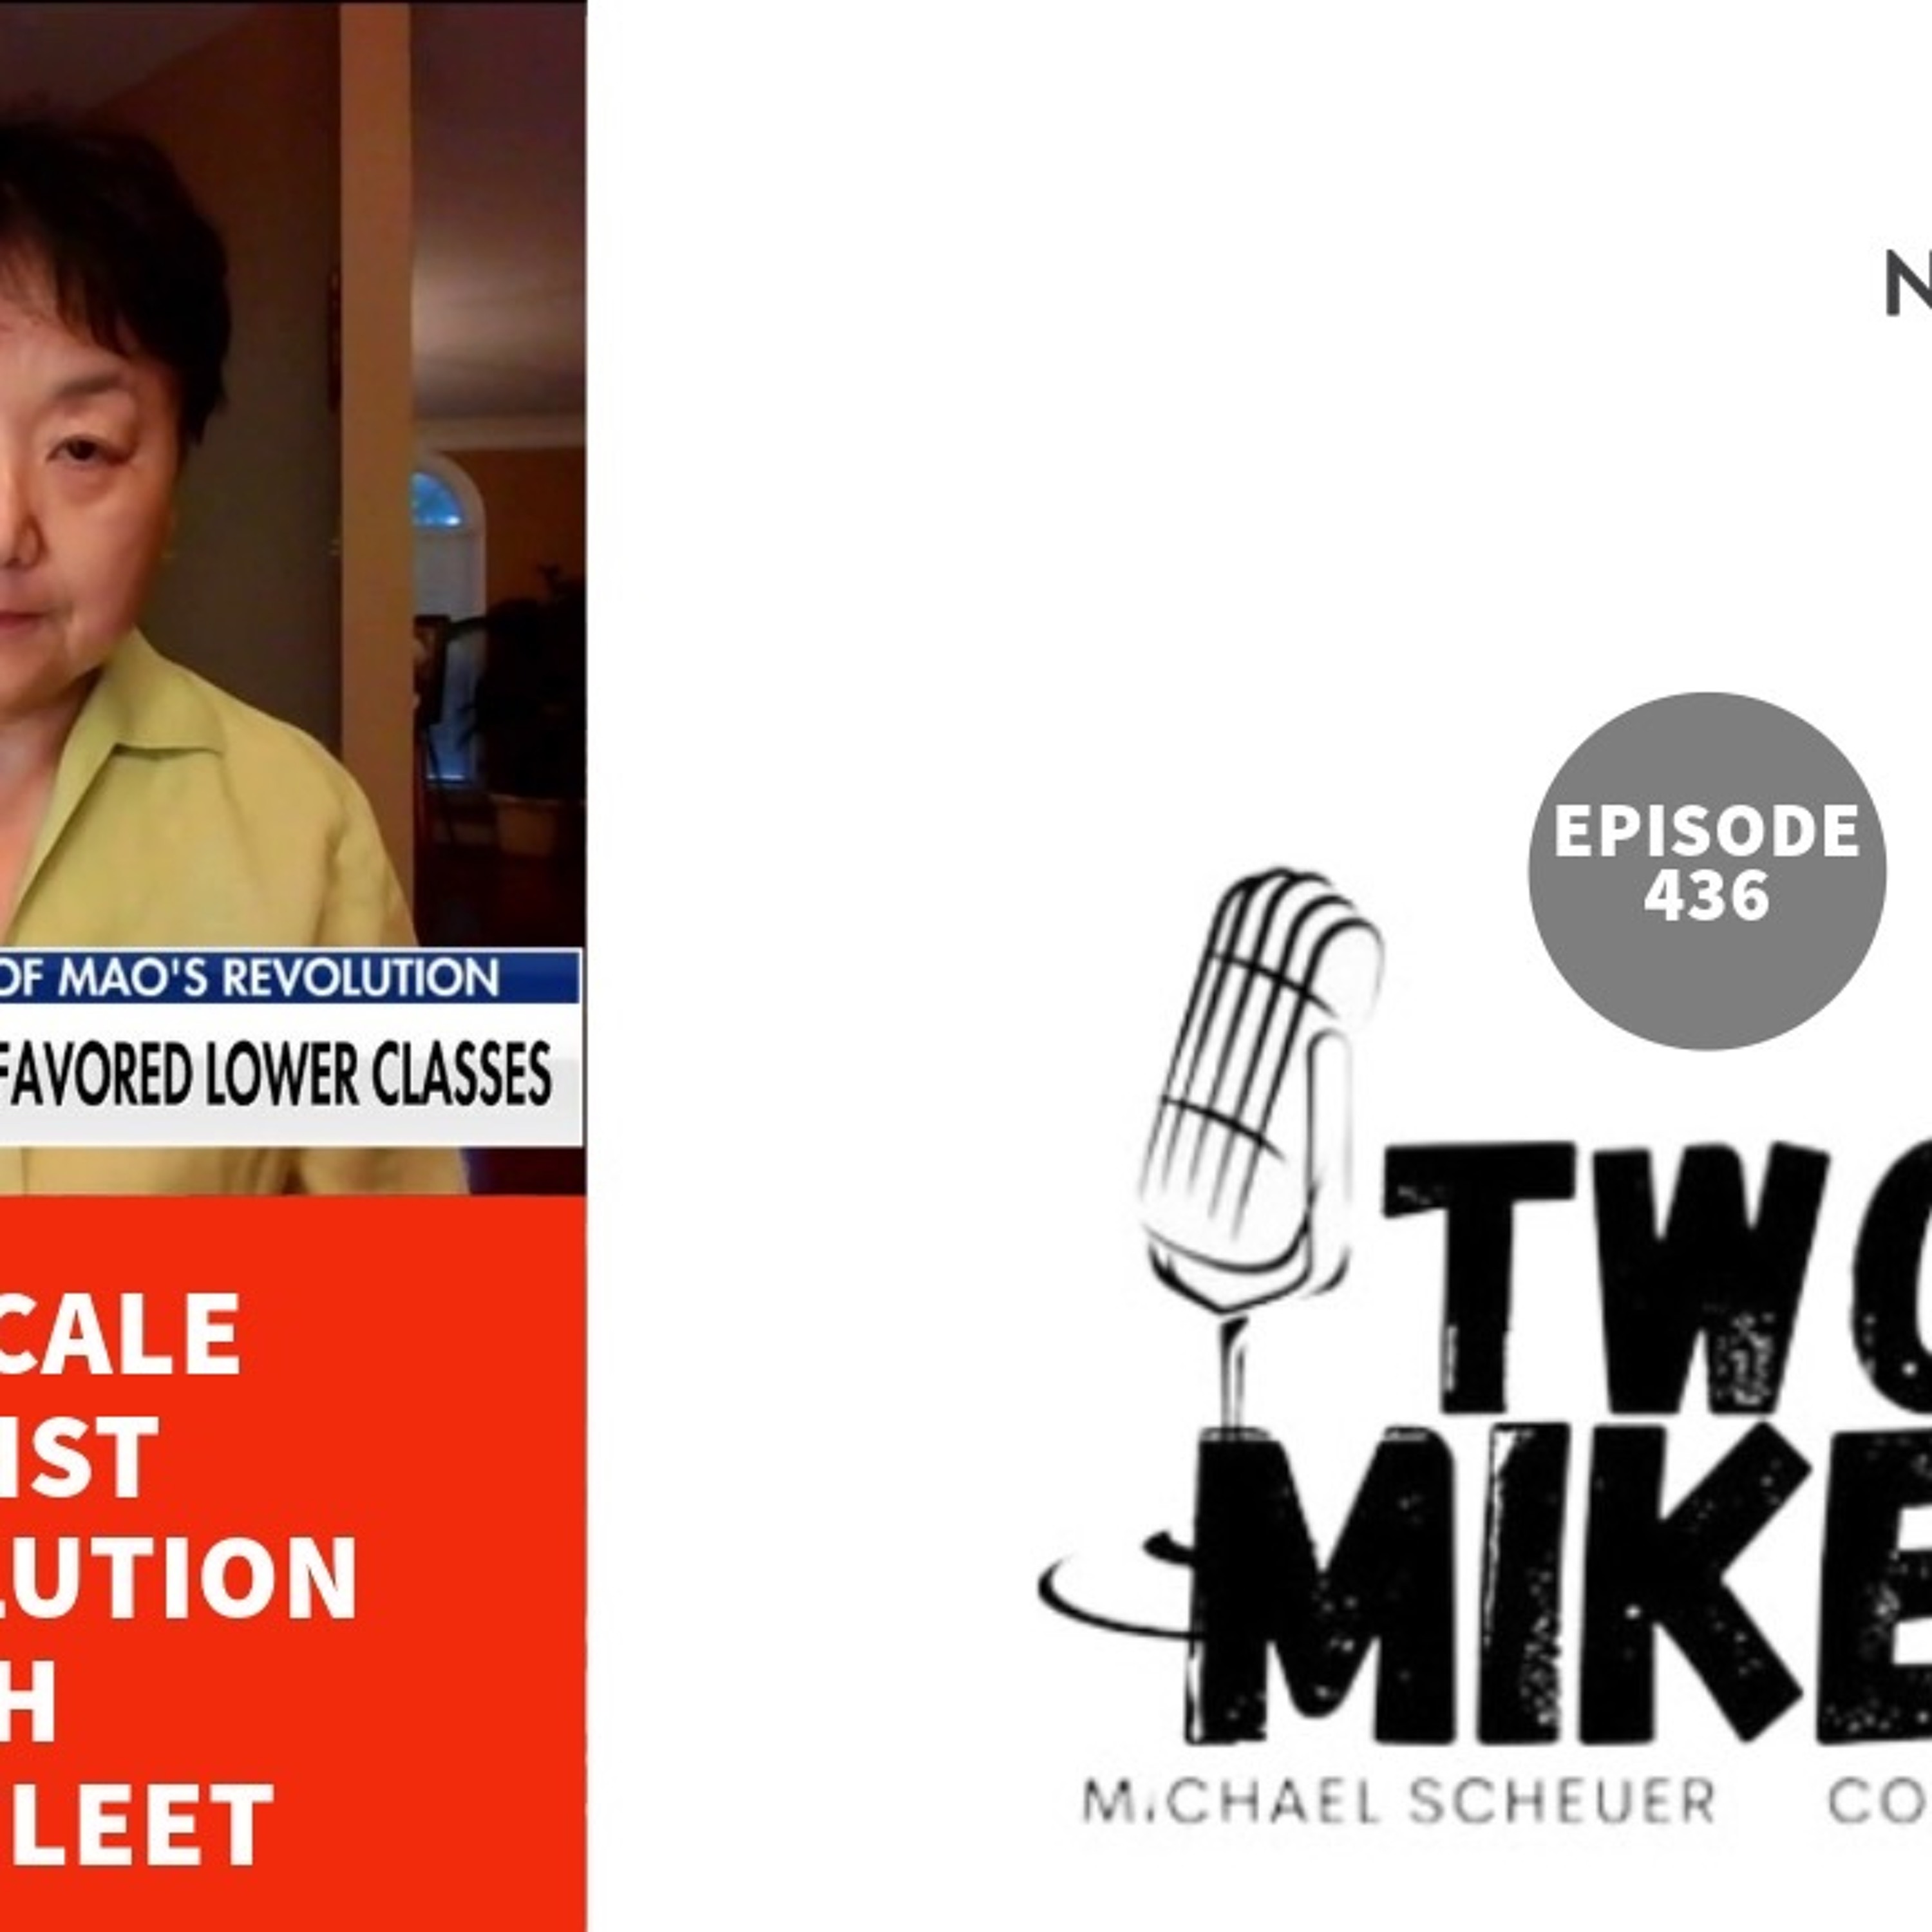 Two Mikes - Full Scale Marxist US Revolution with Xi Van Fleet